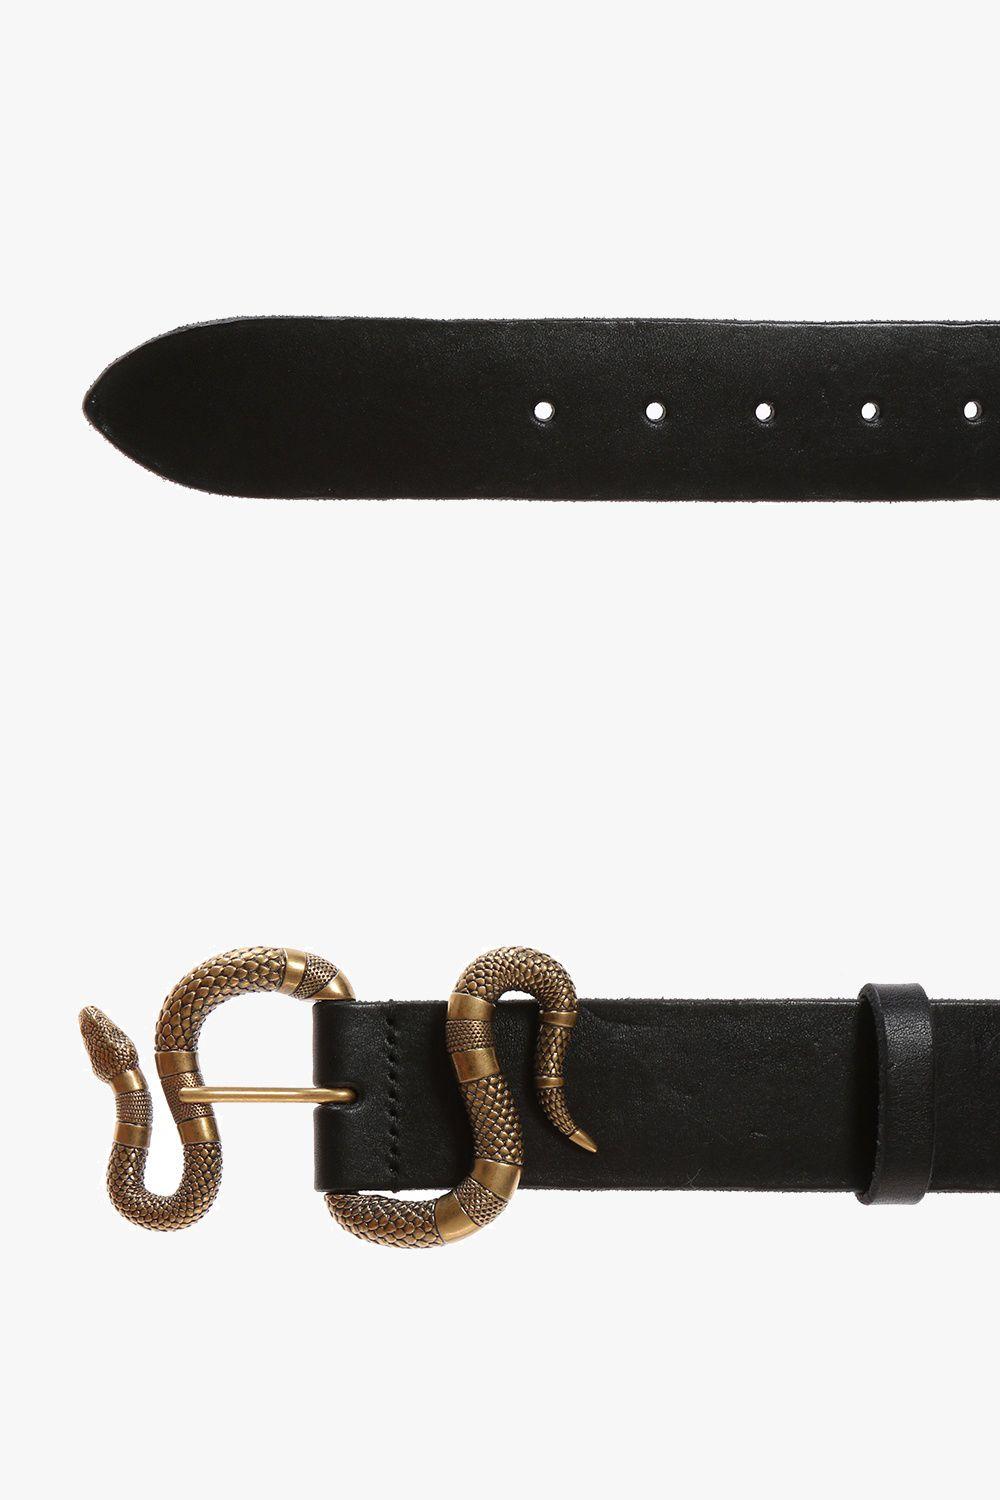 Gucci Leather Belt With Snake Buckle in Black for Men